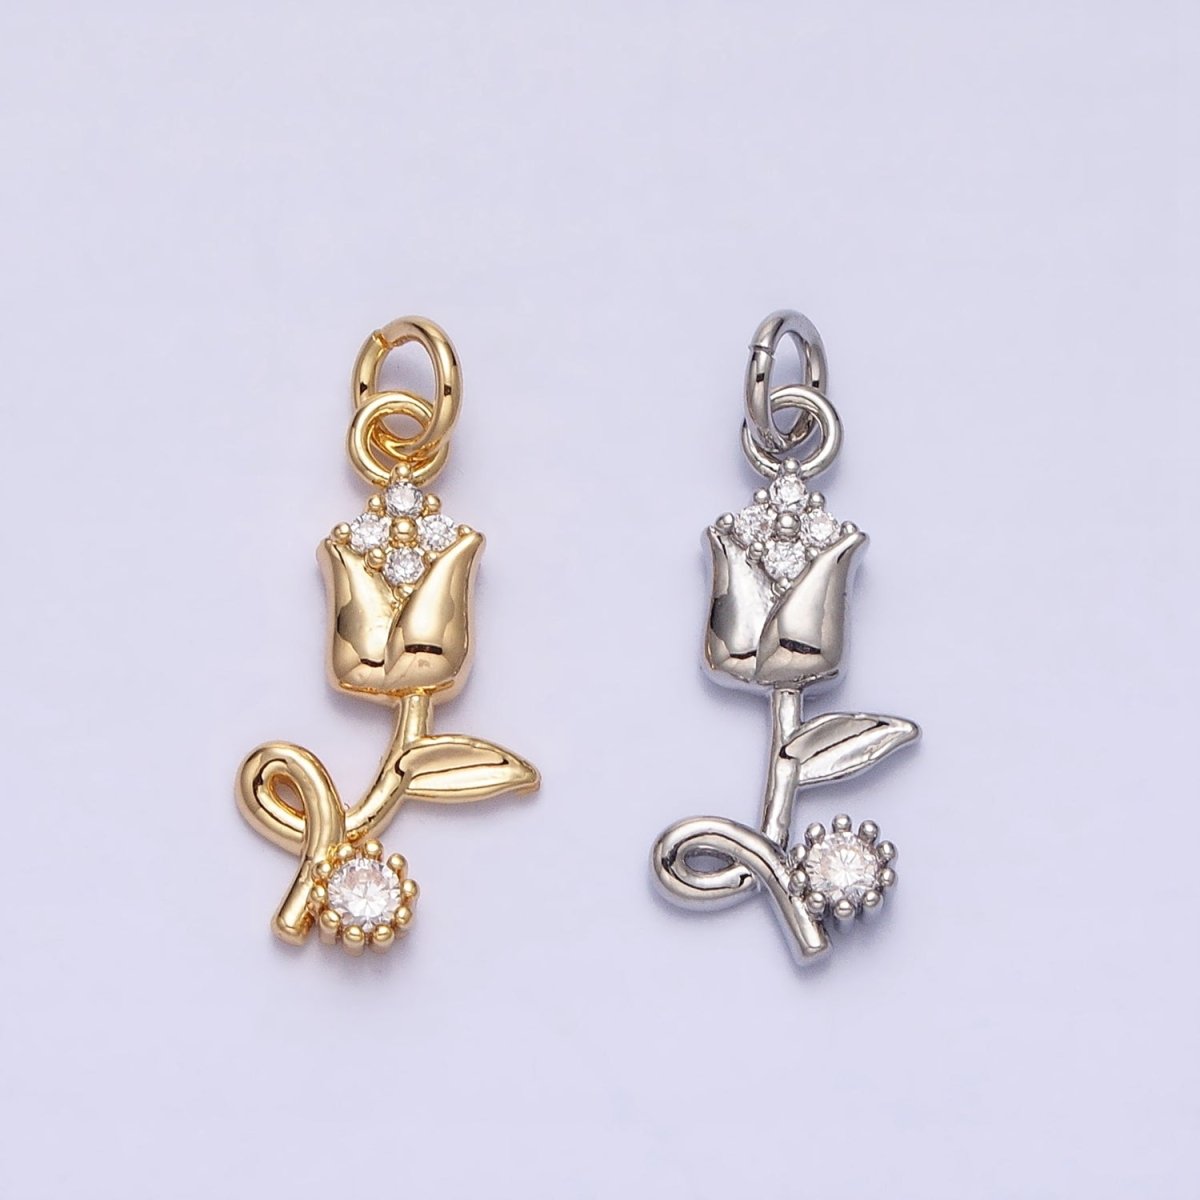 Mini Gold Flower Charm With Cubic Zirconia Stone for Bracelet Necklace Earring Supply AC-500 AC-501 - DLUXCA